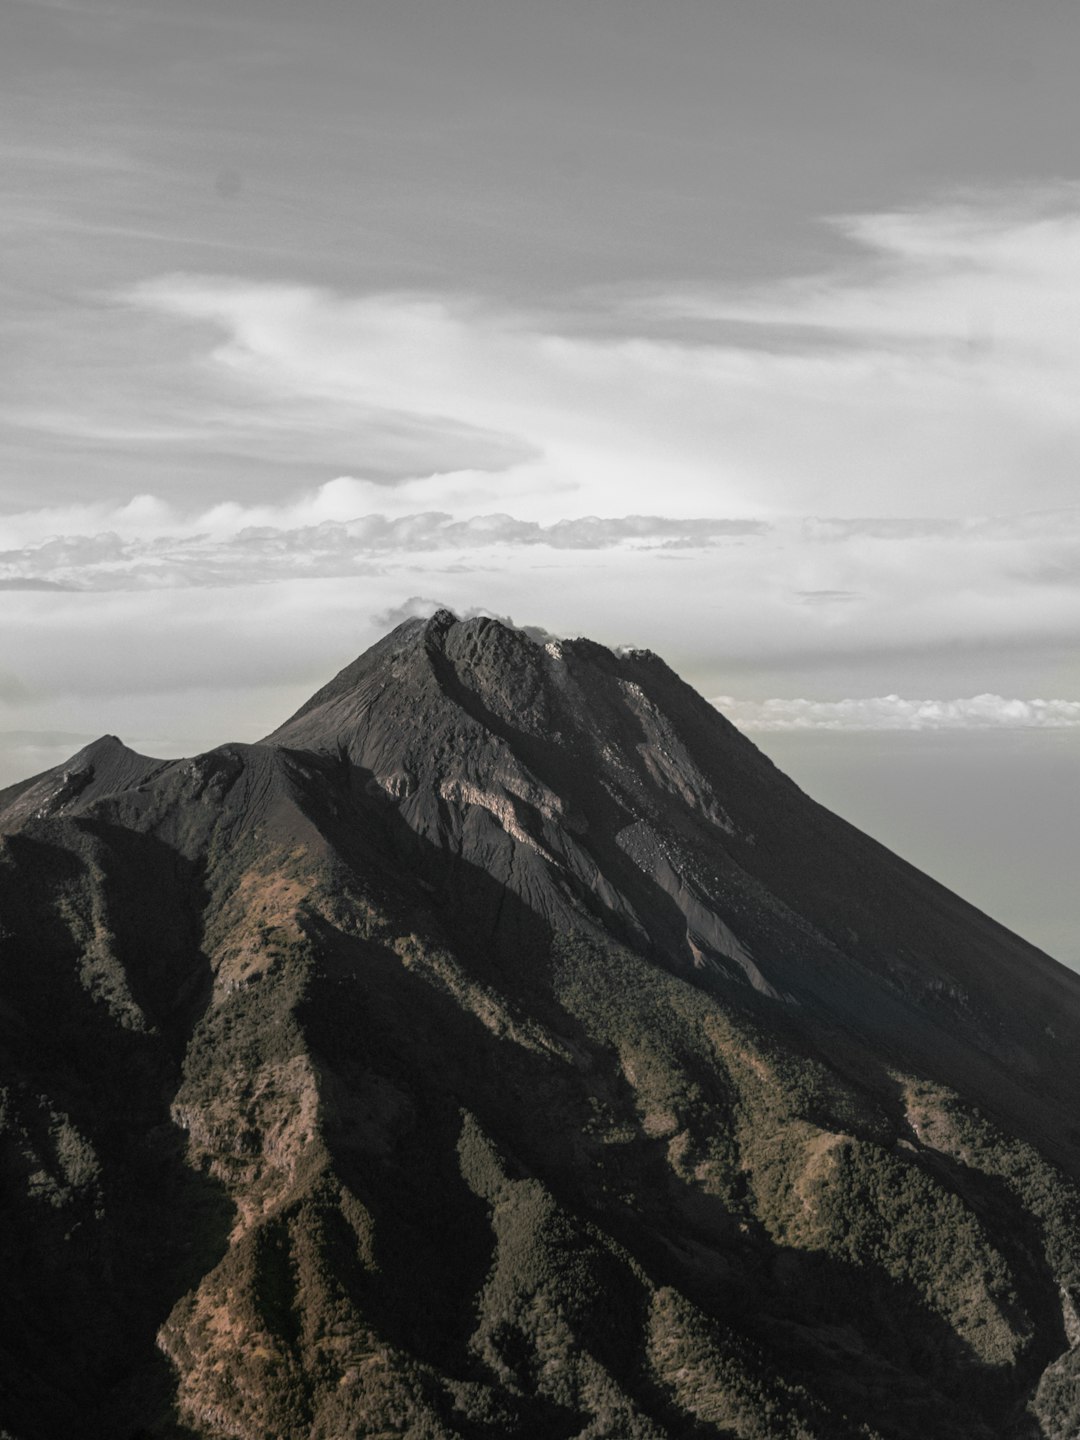 Travel Tips and Stories of Gunung Merbabu in Indonesia